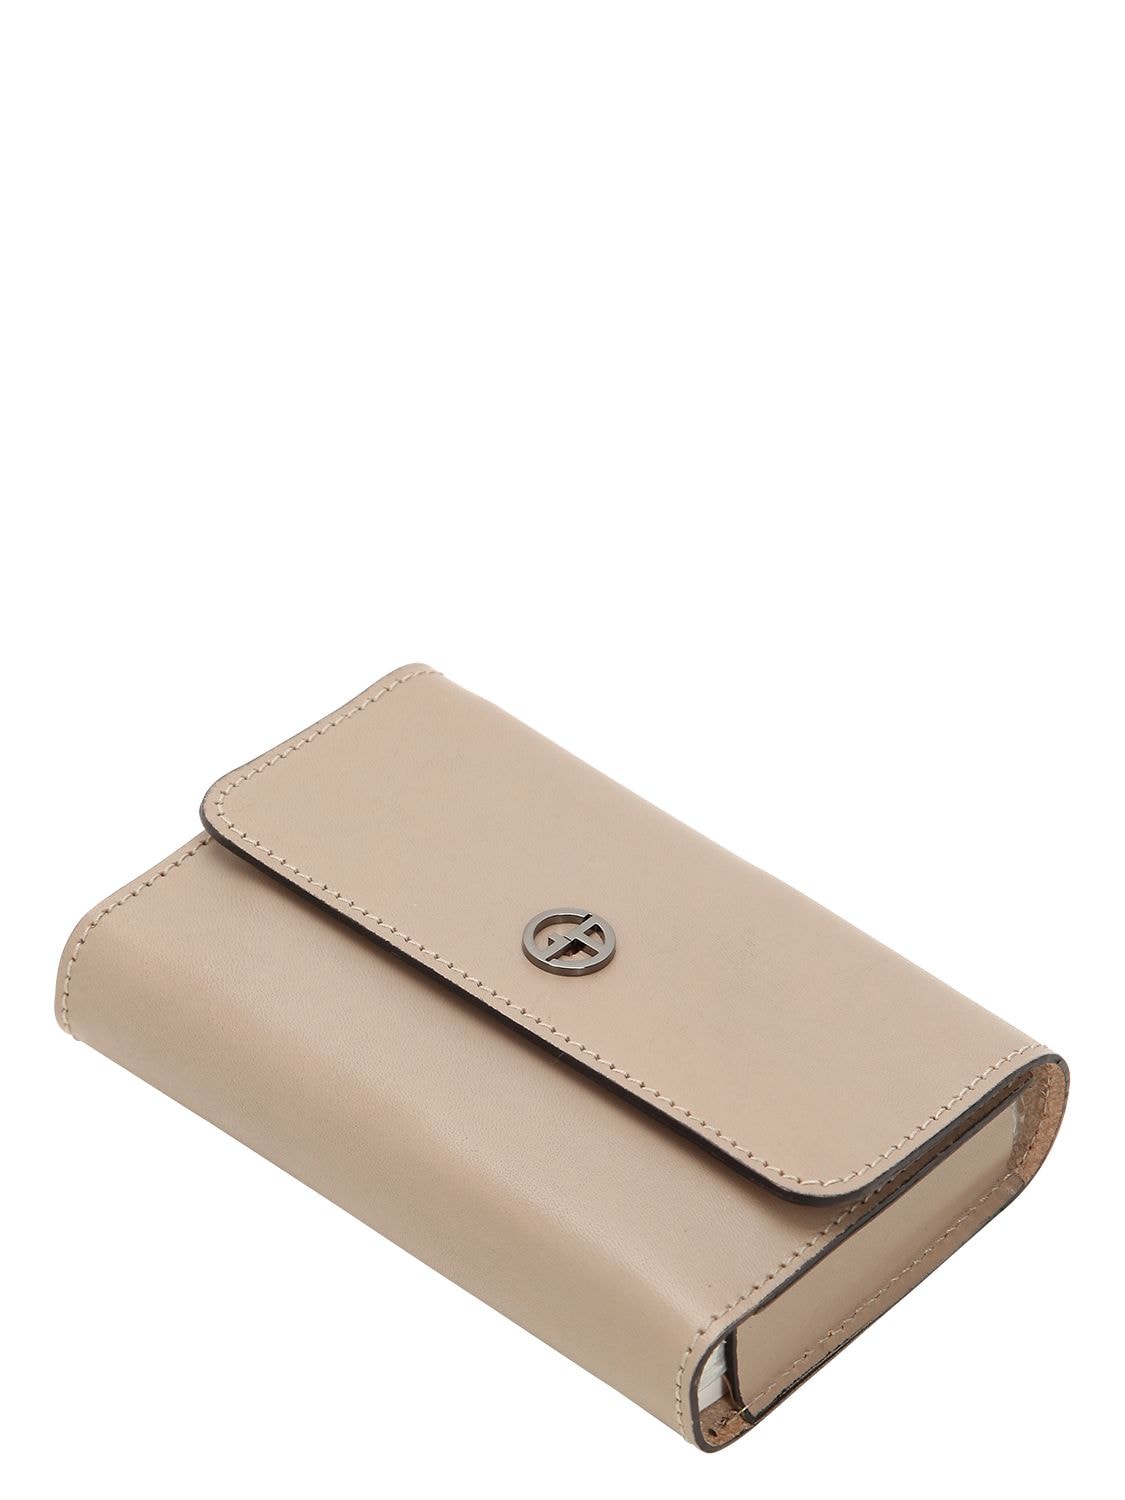 Armani/casa Euchre Cards & Leather Pouch In Beige